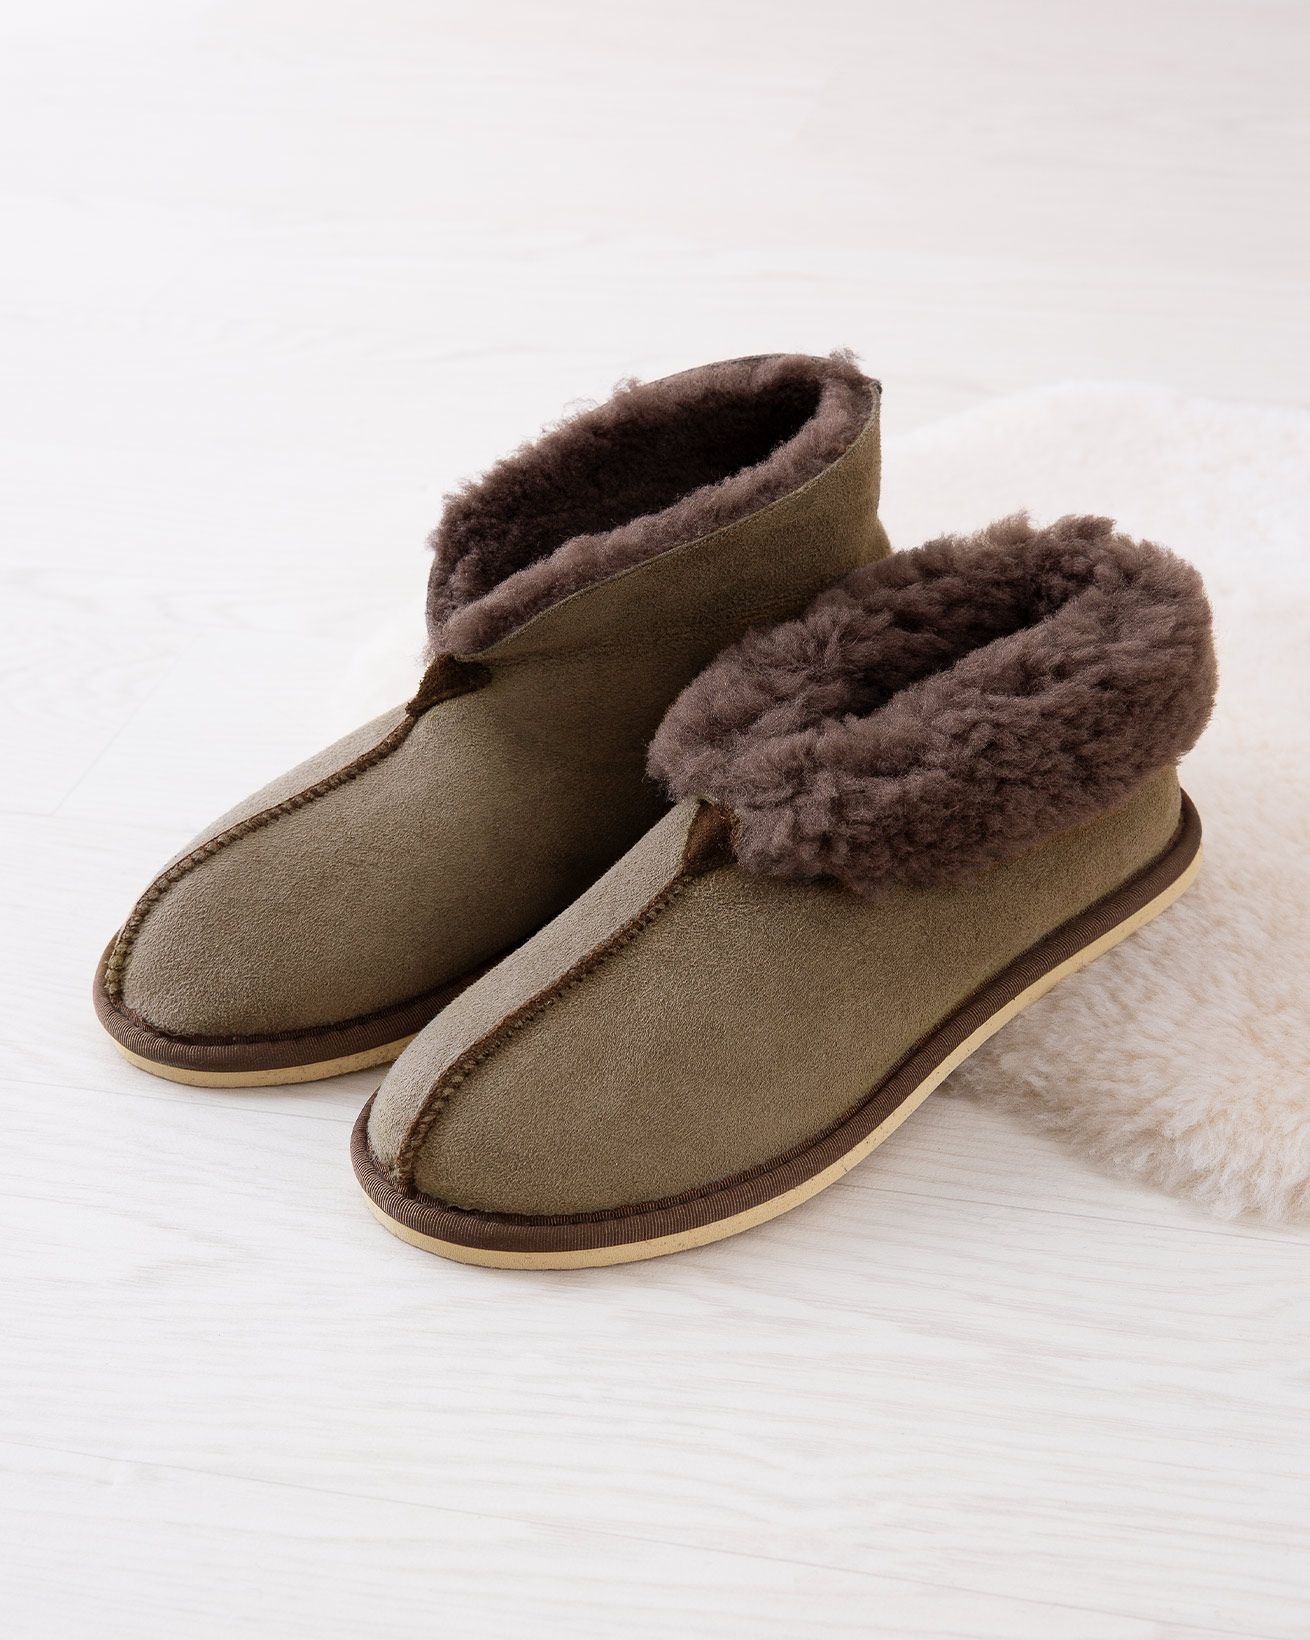 Ladies Shearling Bootee Slippers